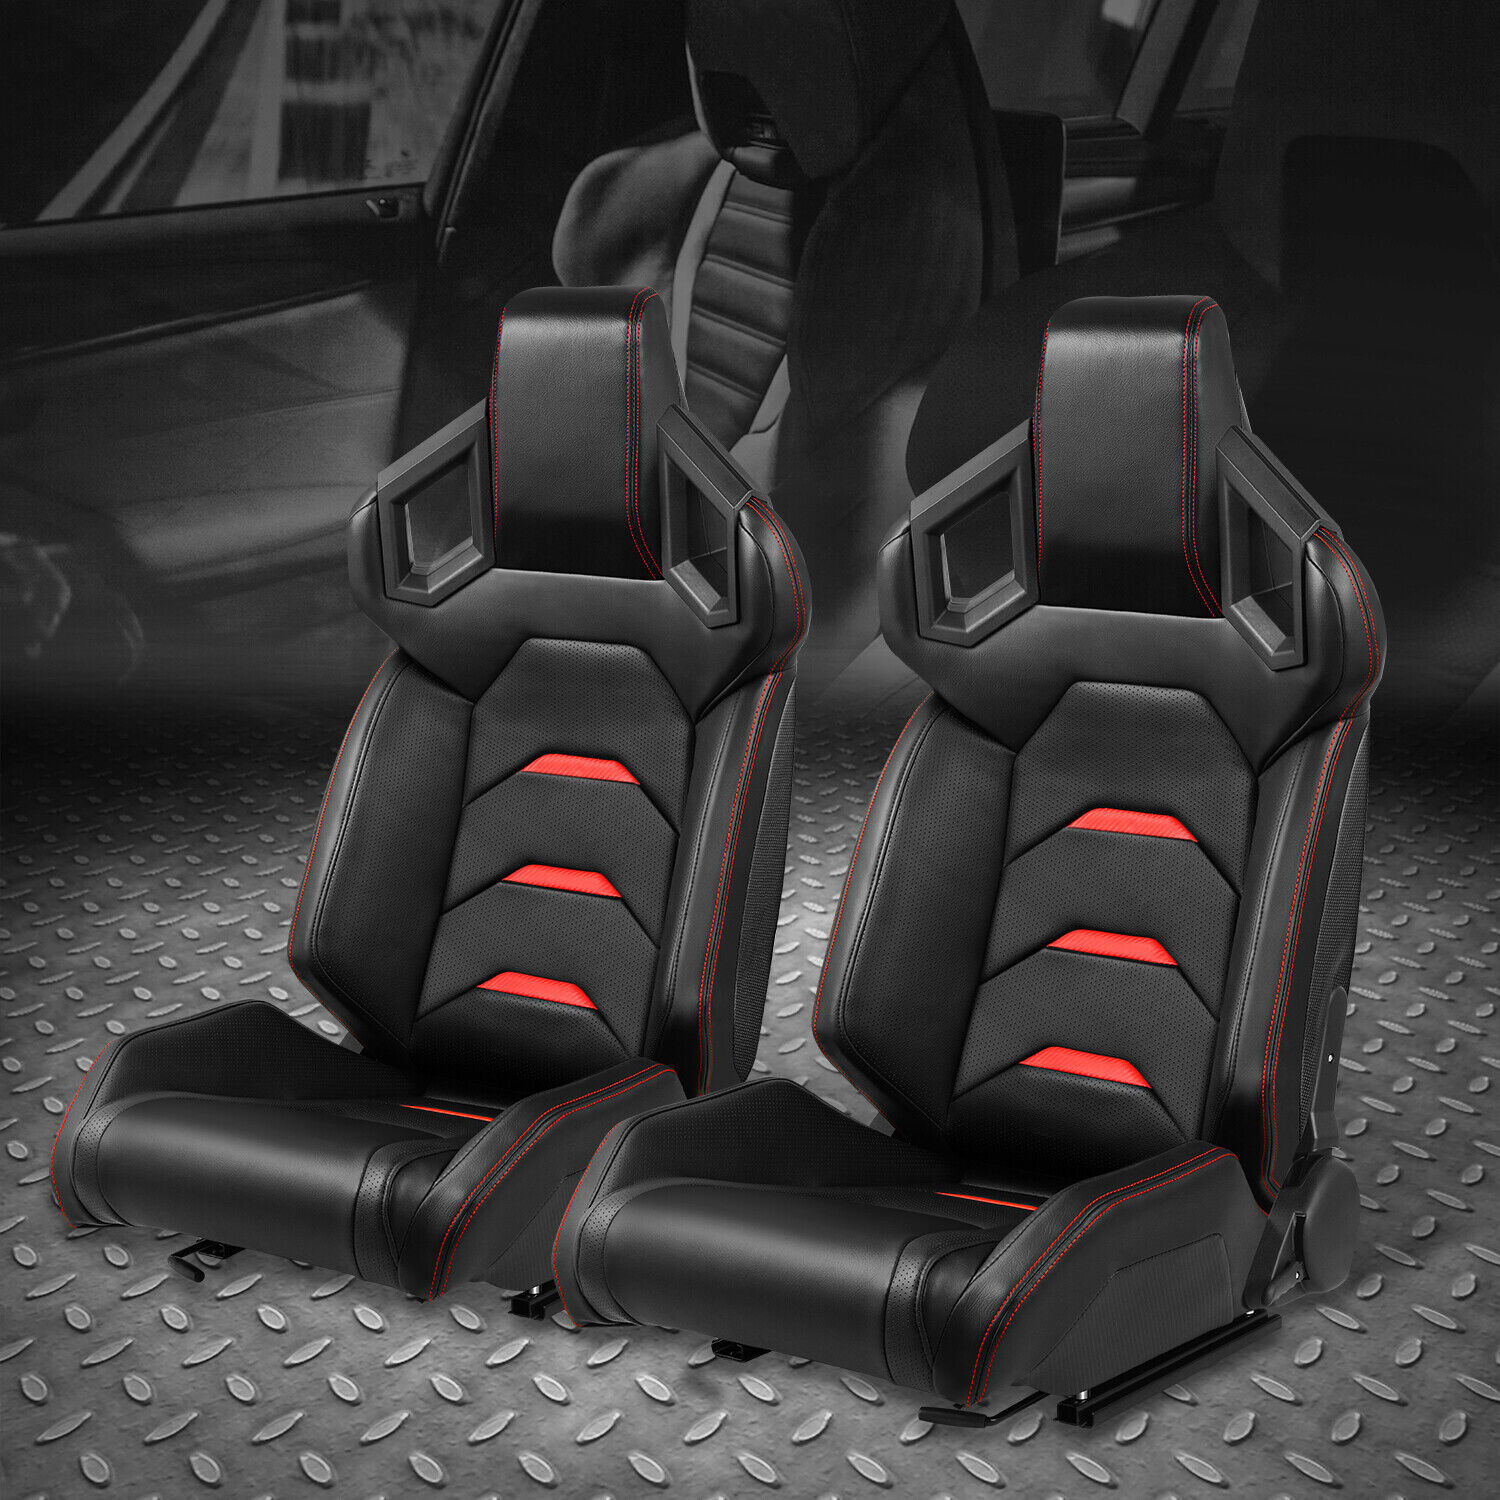 Pair of Universal Black Vinyl Red Stitching Reclinable Racing Seats w/ Sliders